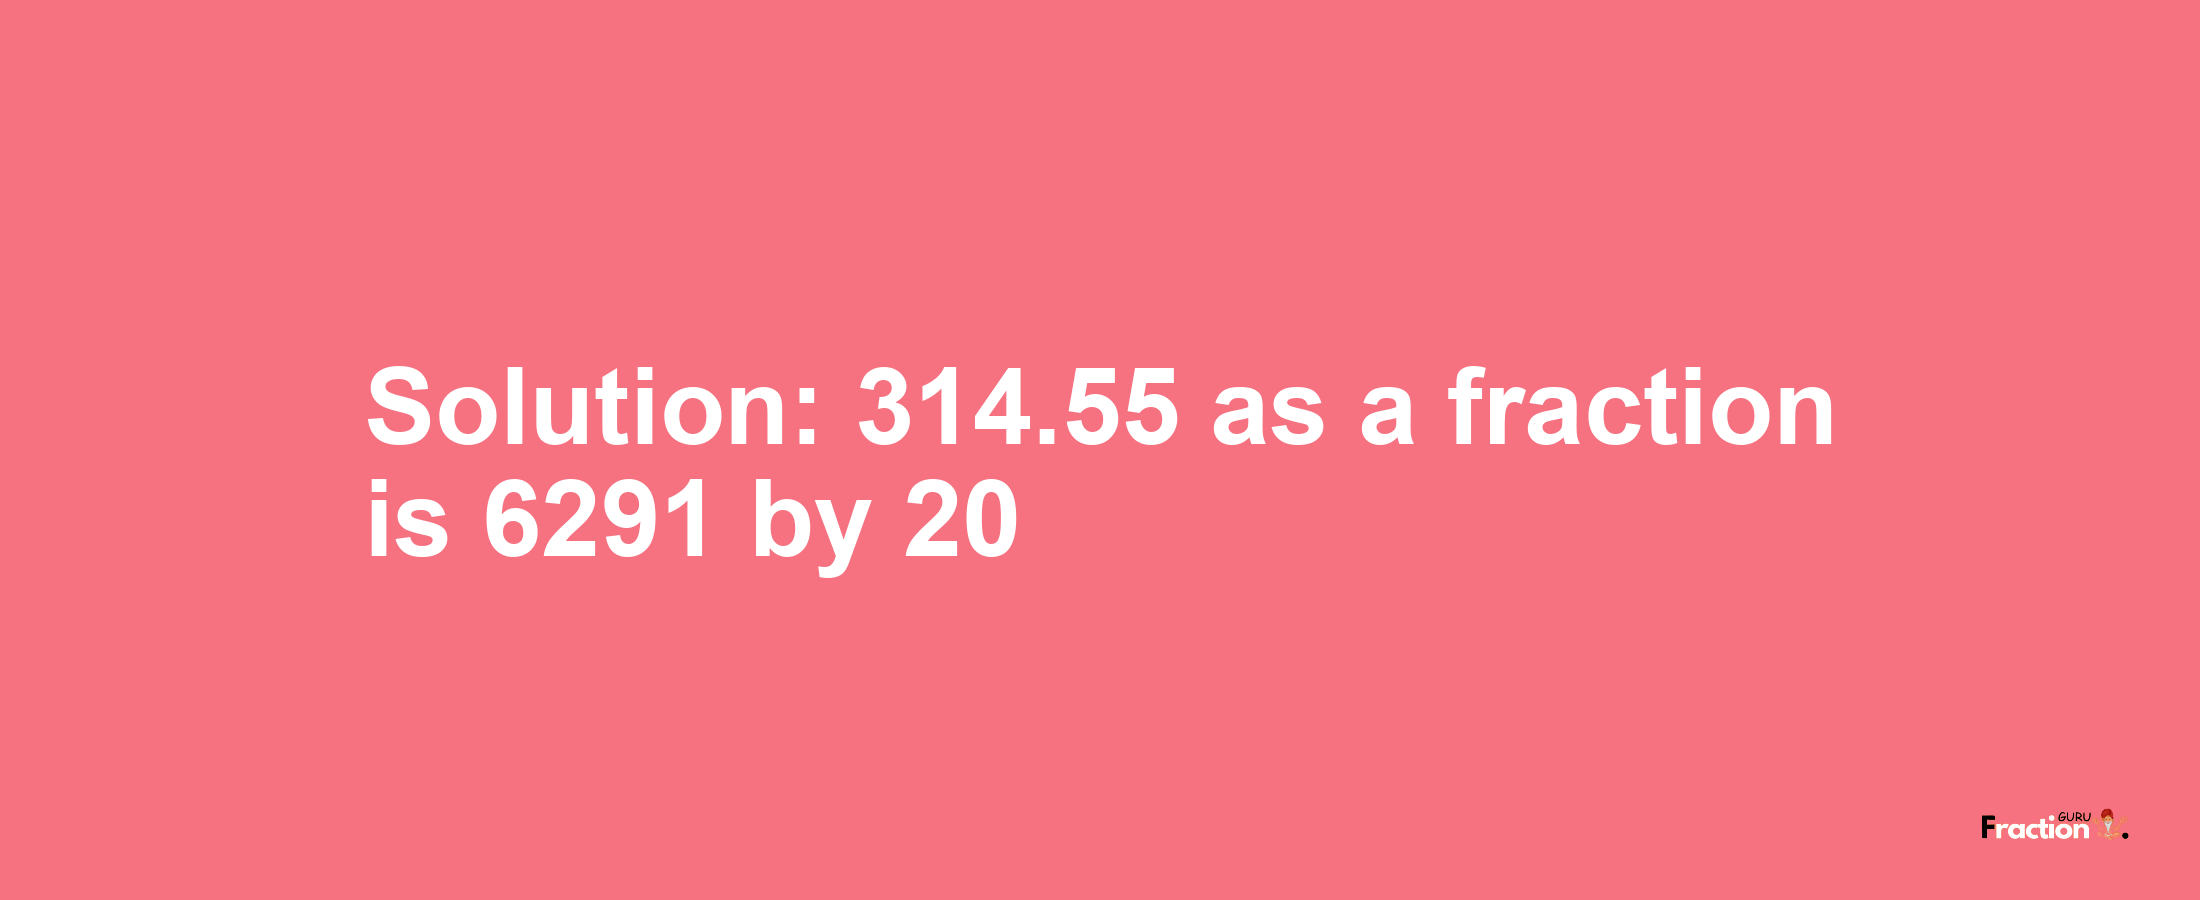 Solution:314.55 as a fraction is 6291/20